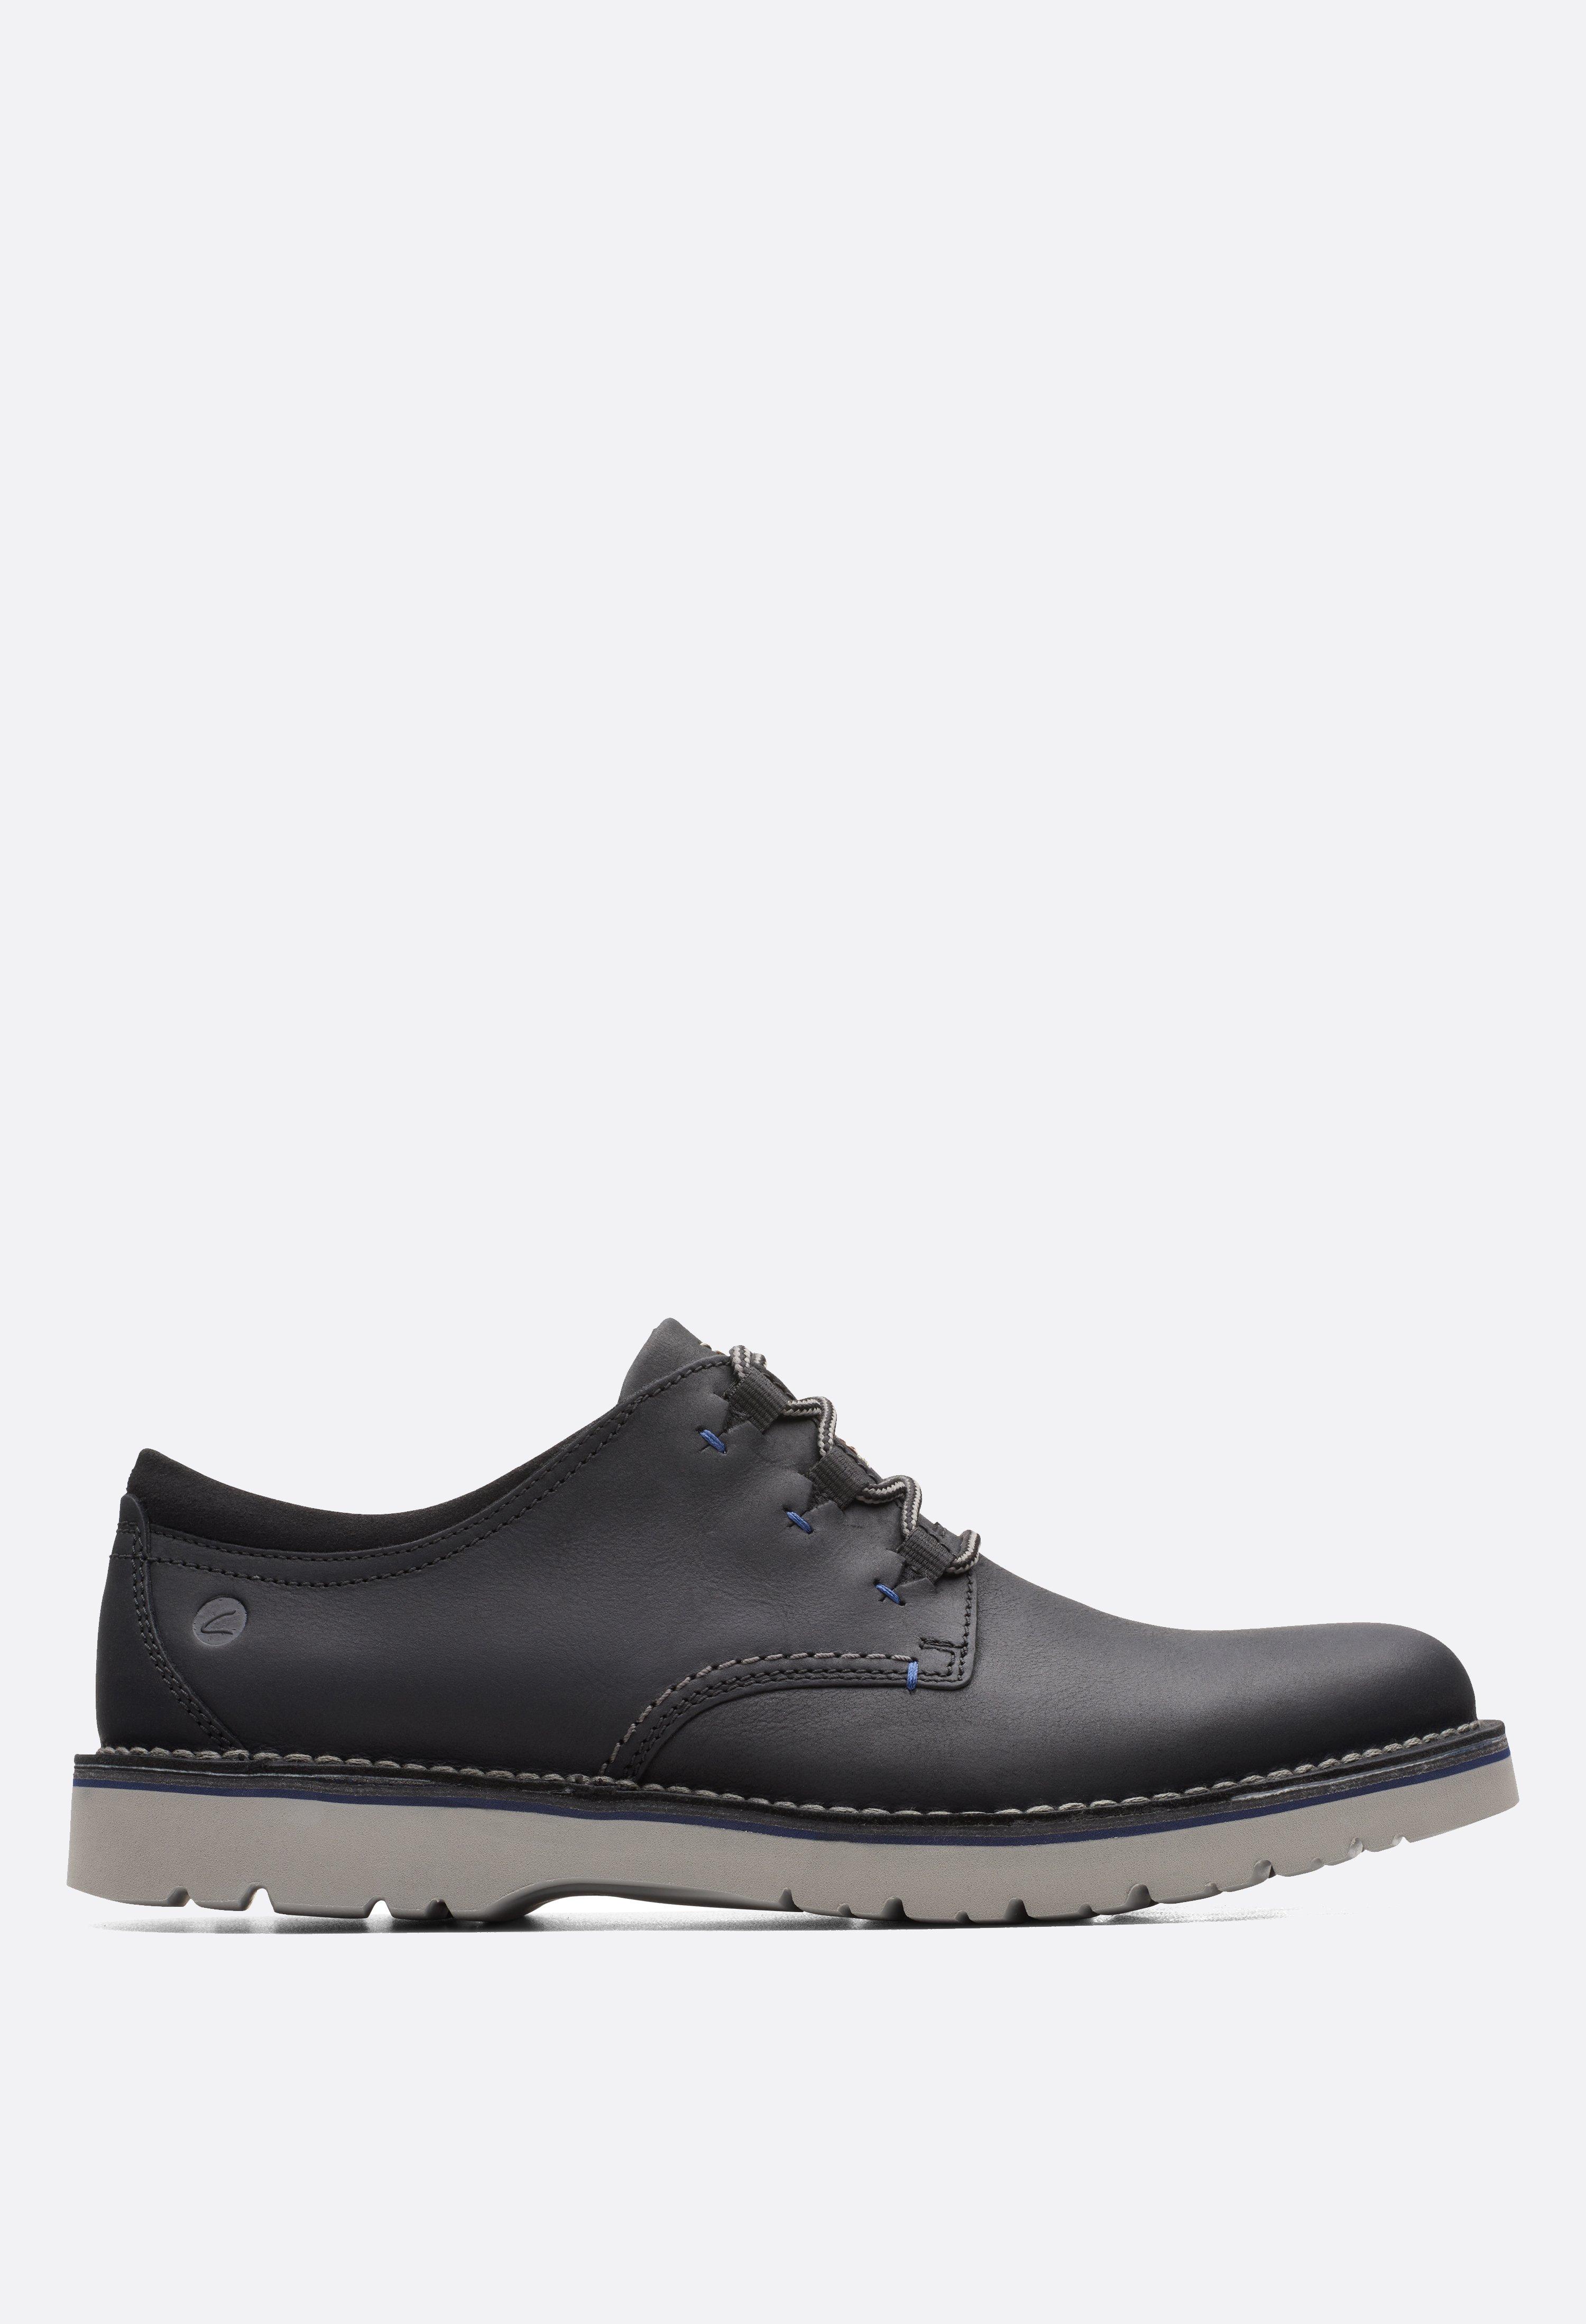 clarks eastford low lace up shoes - mens - black - size: 7